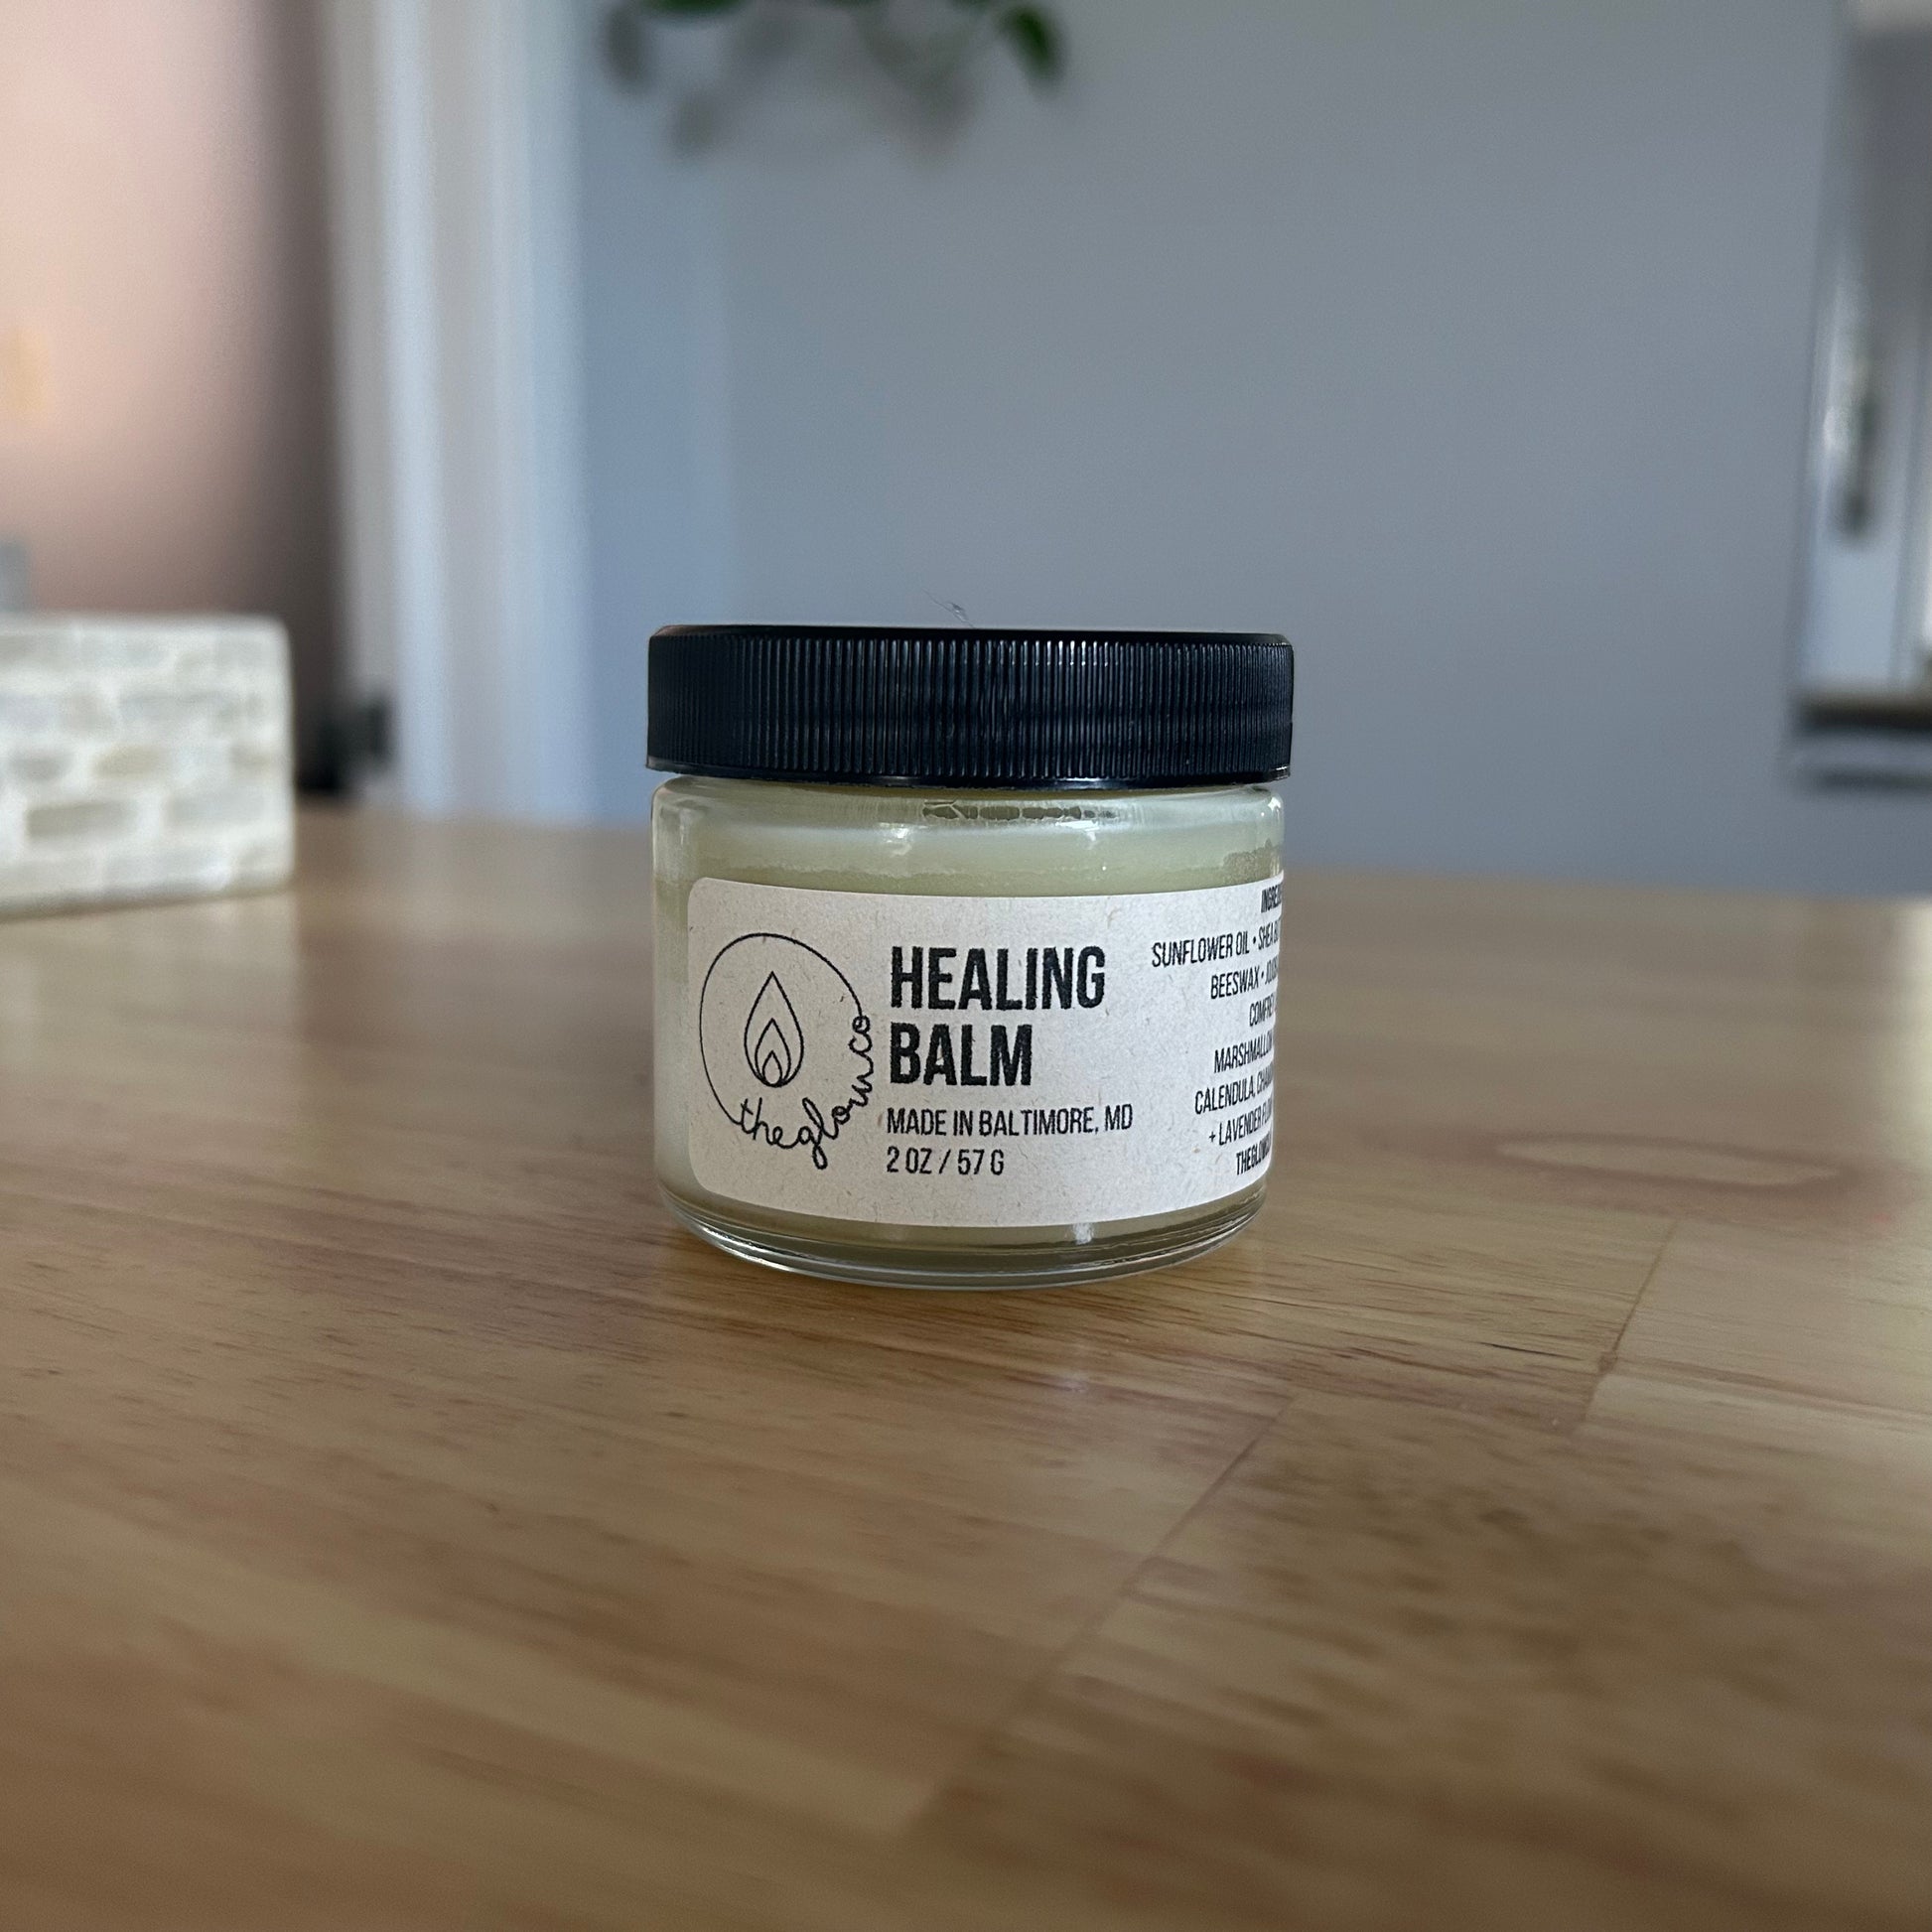 2 ounce glass jar of Healing Balm by The Glow Co.